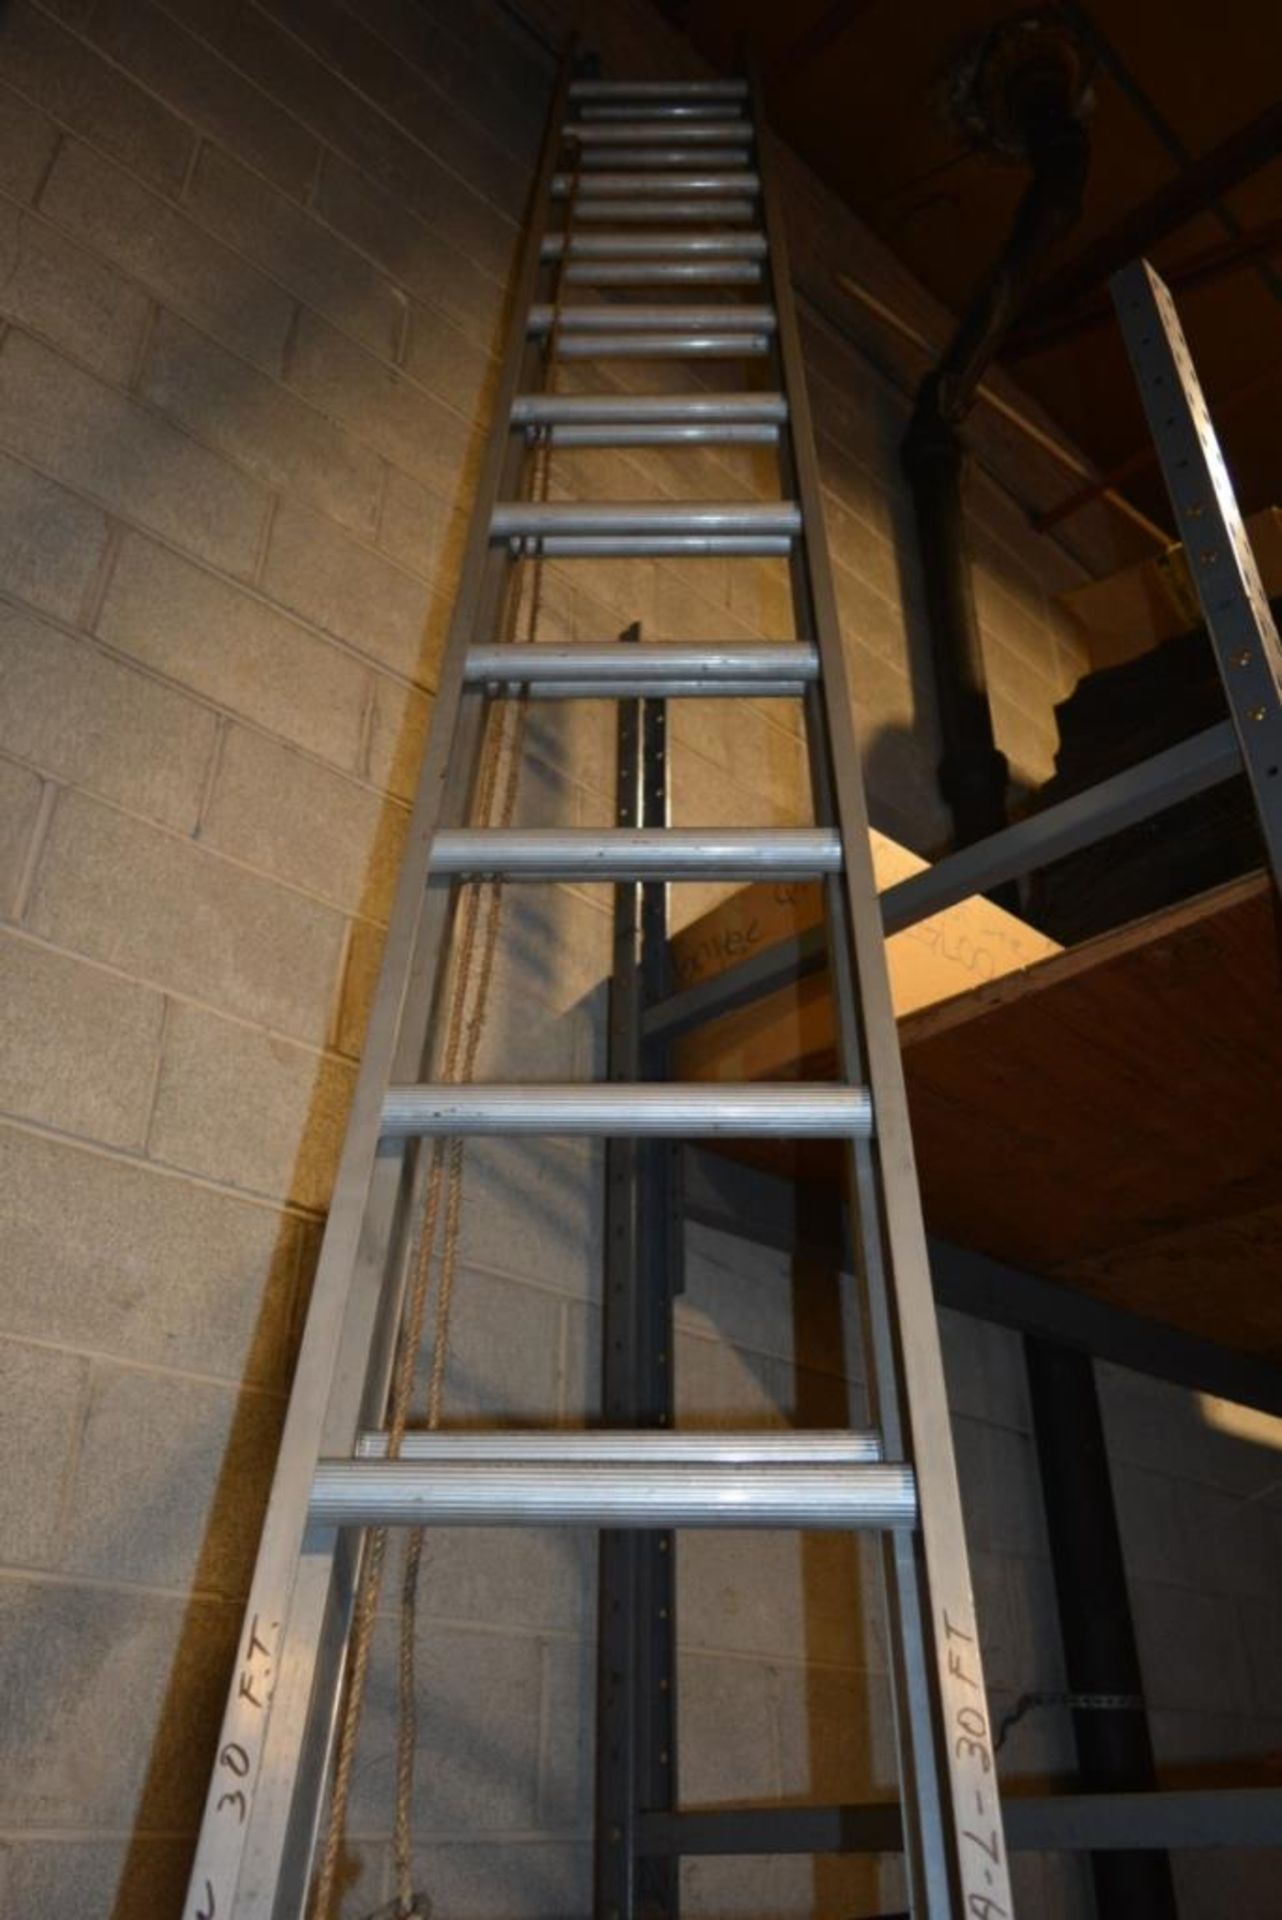 American 30' Aluminum Extention Ladder - Image 4 of 4